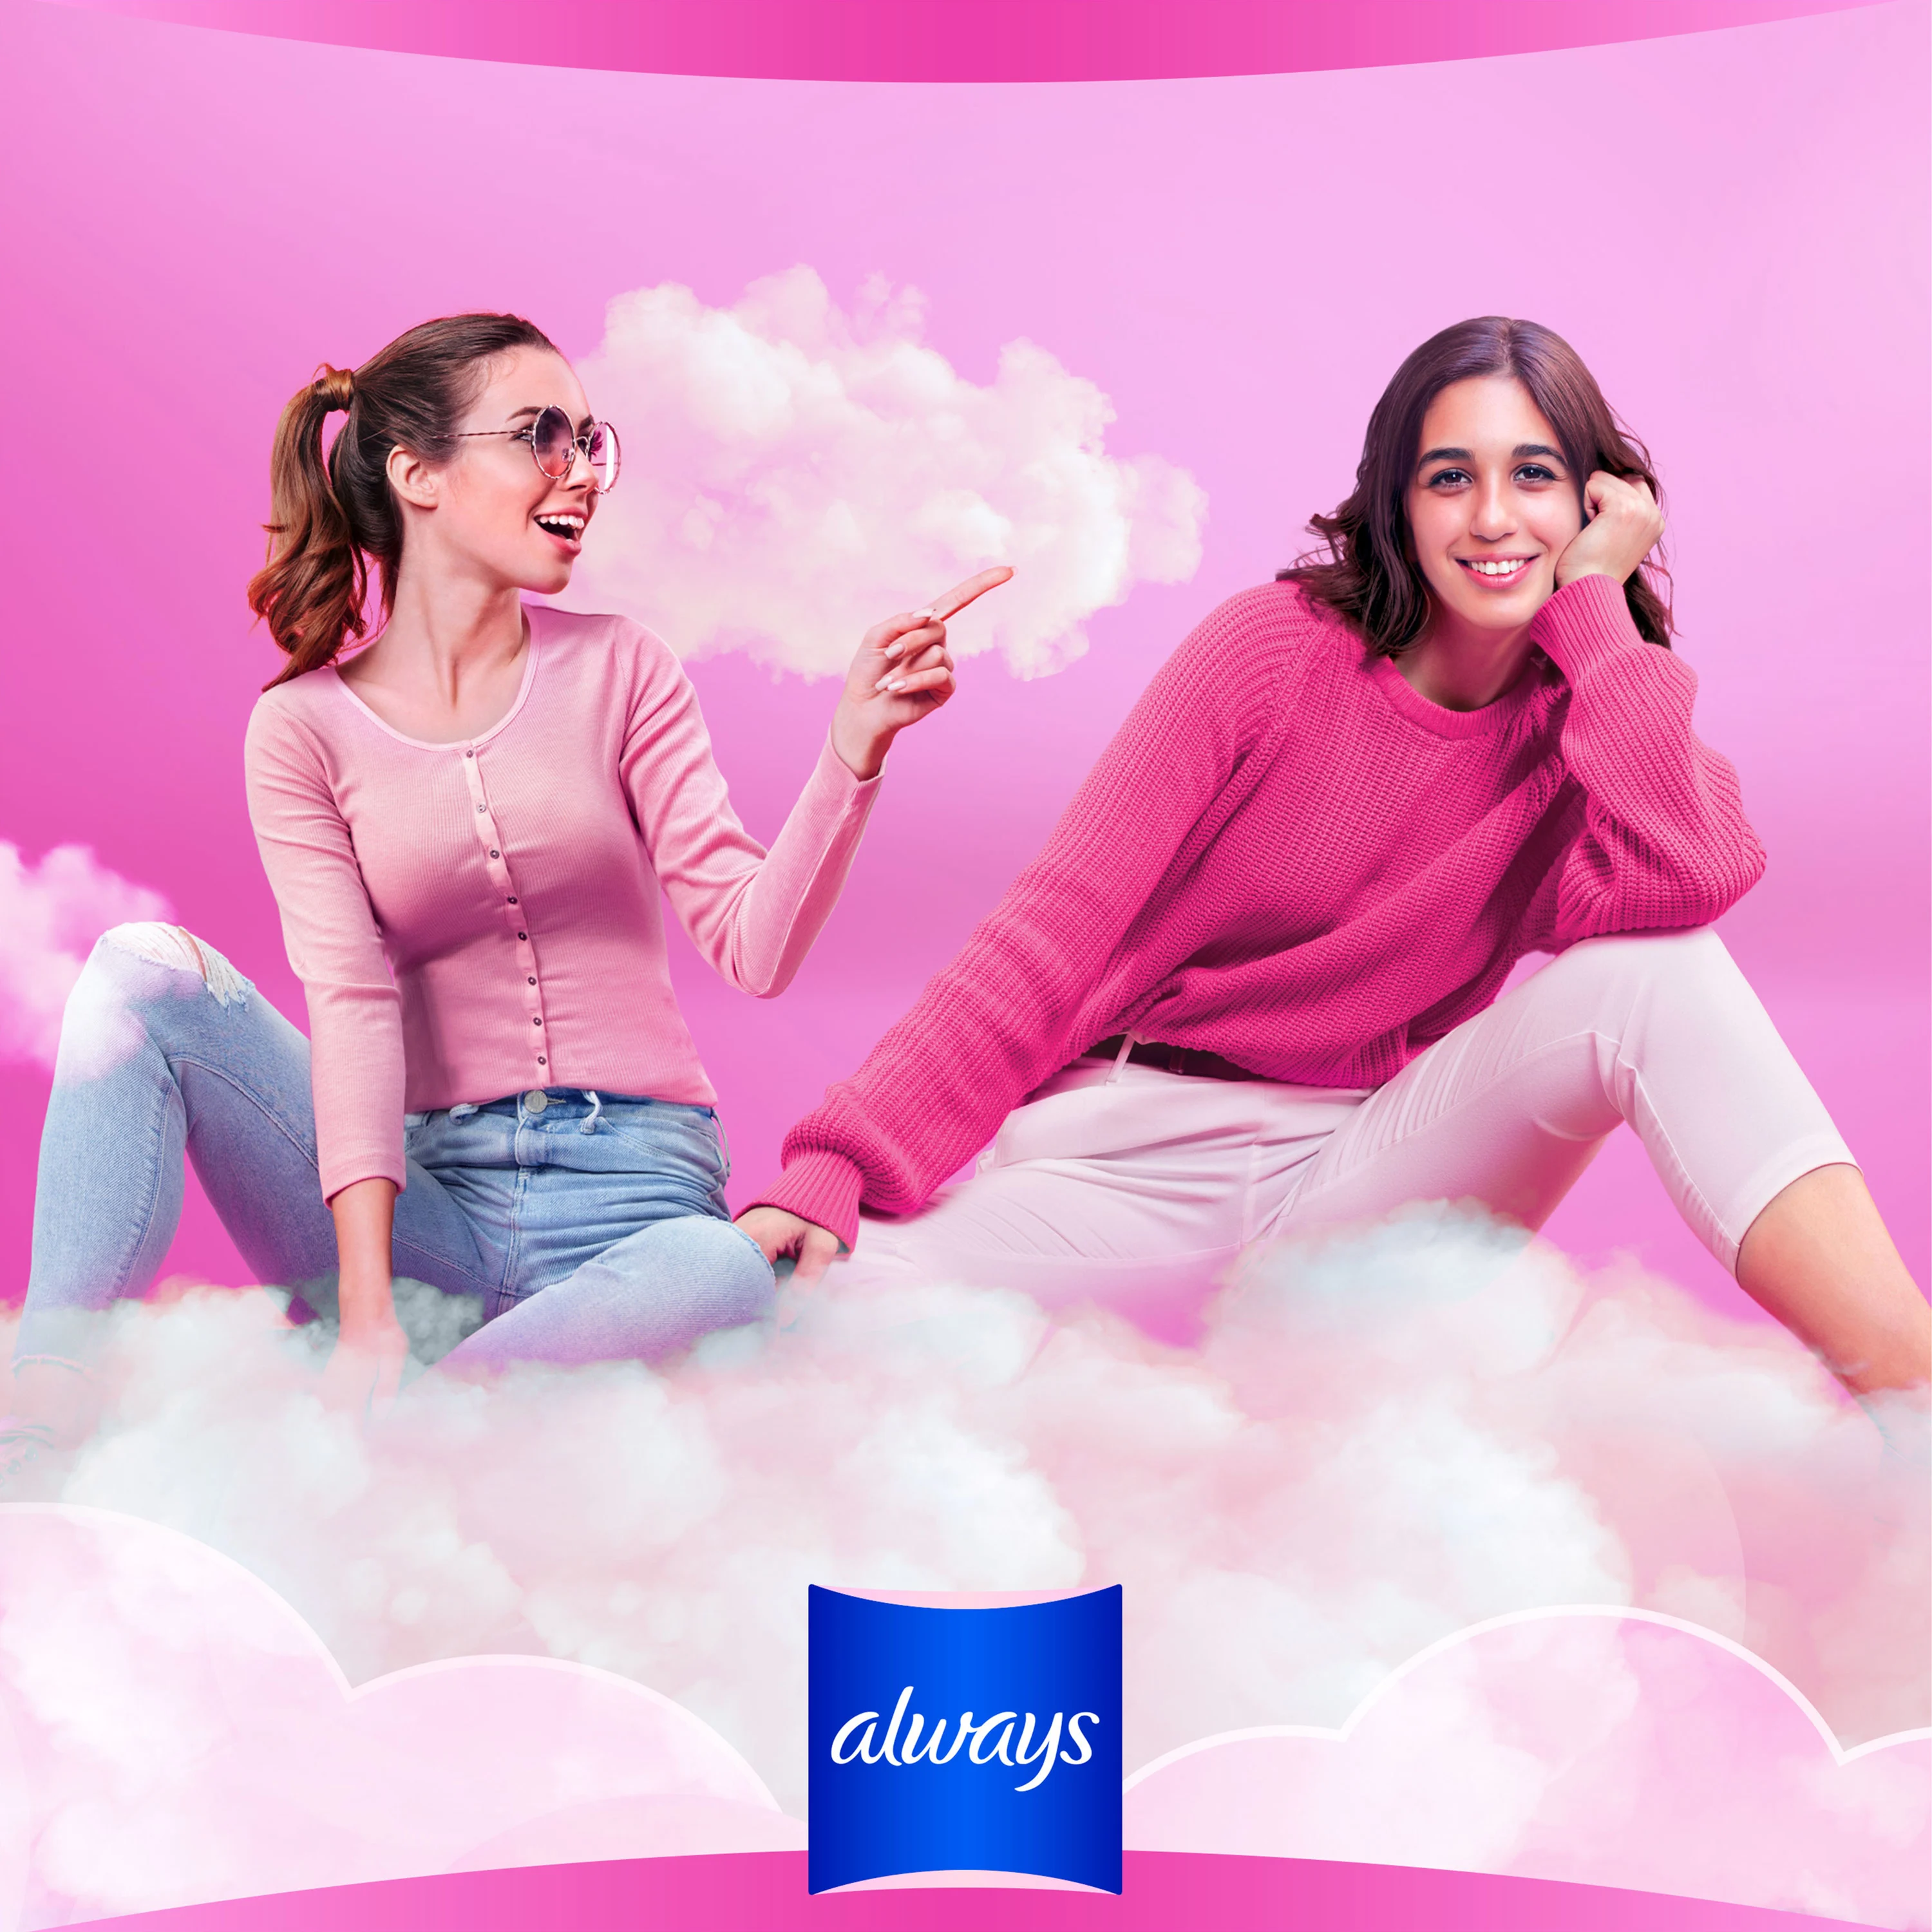 Two girls sitting on clouds